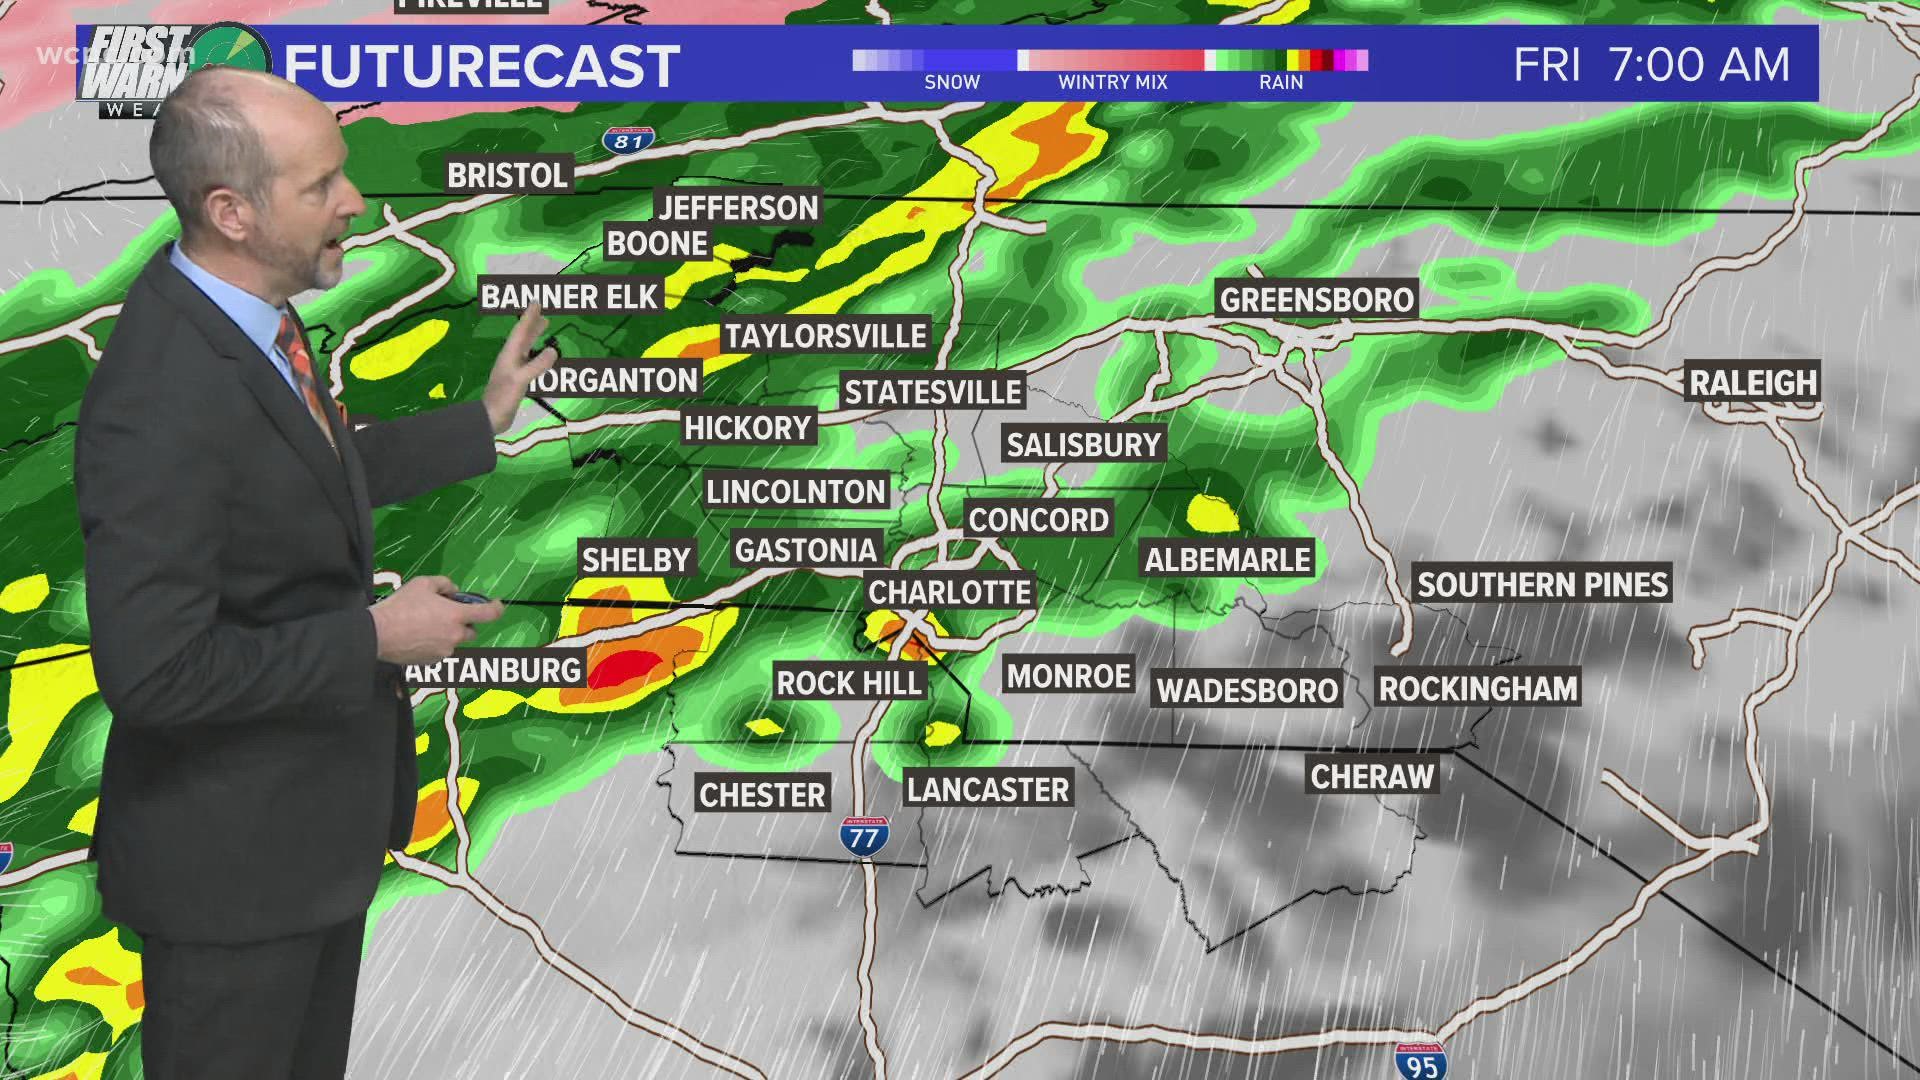 The best chance to see heavy rain across the Charlotte area is Friday morning. Chief Meteorologist Brad Panovich says showers will taper off throughout the day.